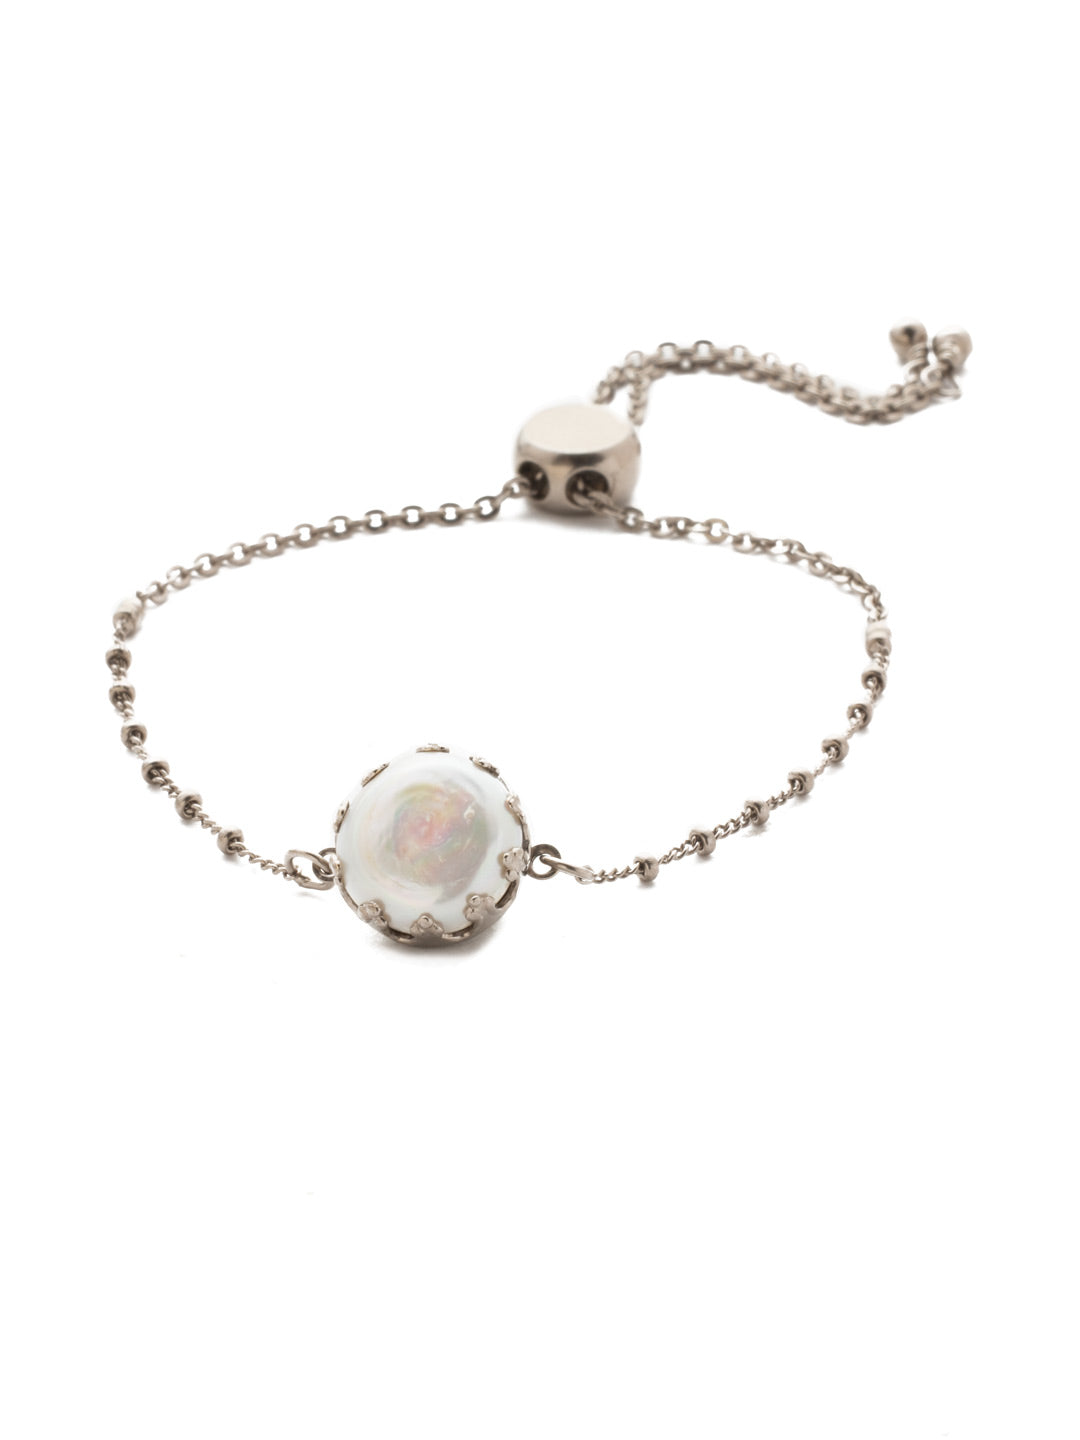 Delaney Slider Bracelet - BEN35ASSTC - <p>The Delaney Slider Bracelet is a classic. Anchored by an exquisite freshwater pearl, and paired with delicate metal detail, it's a stand-out everyone will love. From Sorrelli's Storm Clouds collection in our Antique Silver-tone finish.</p>